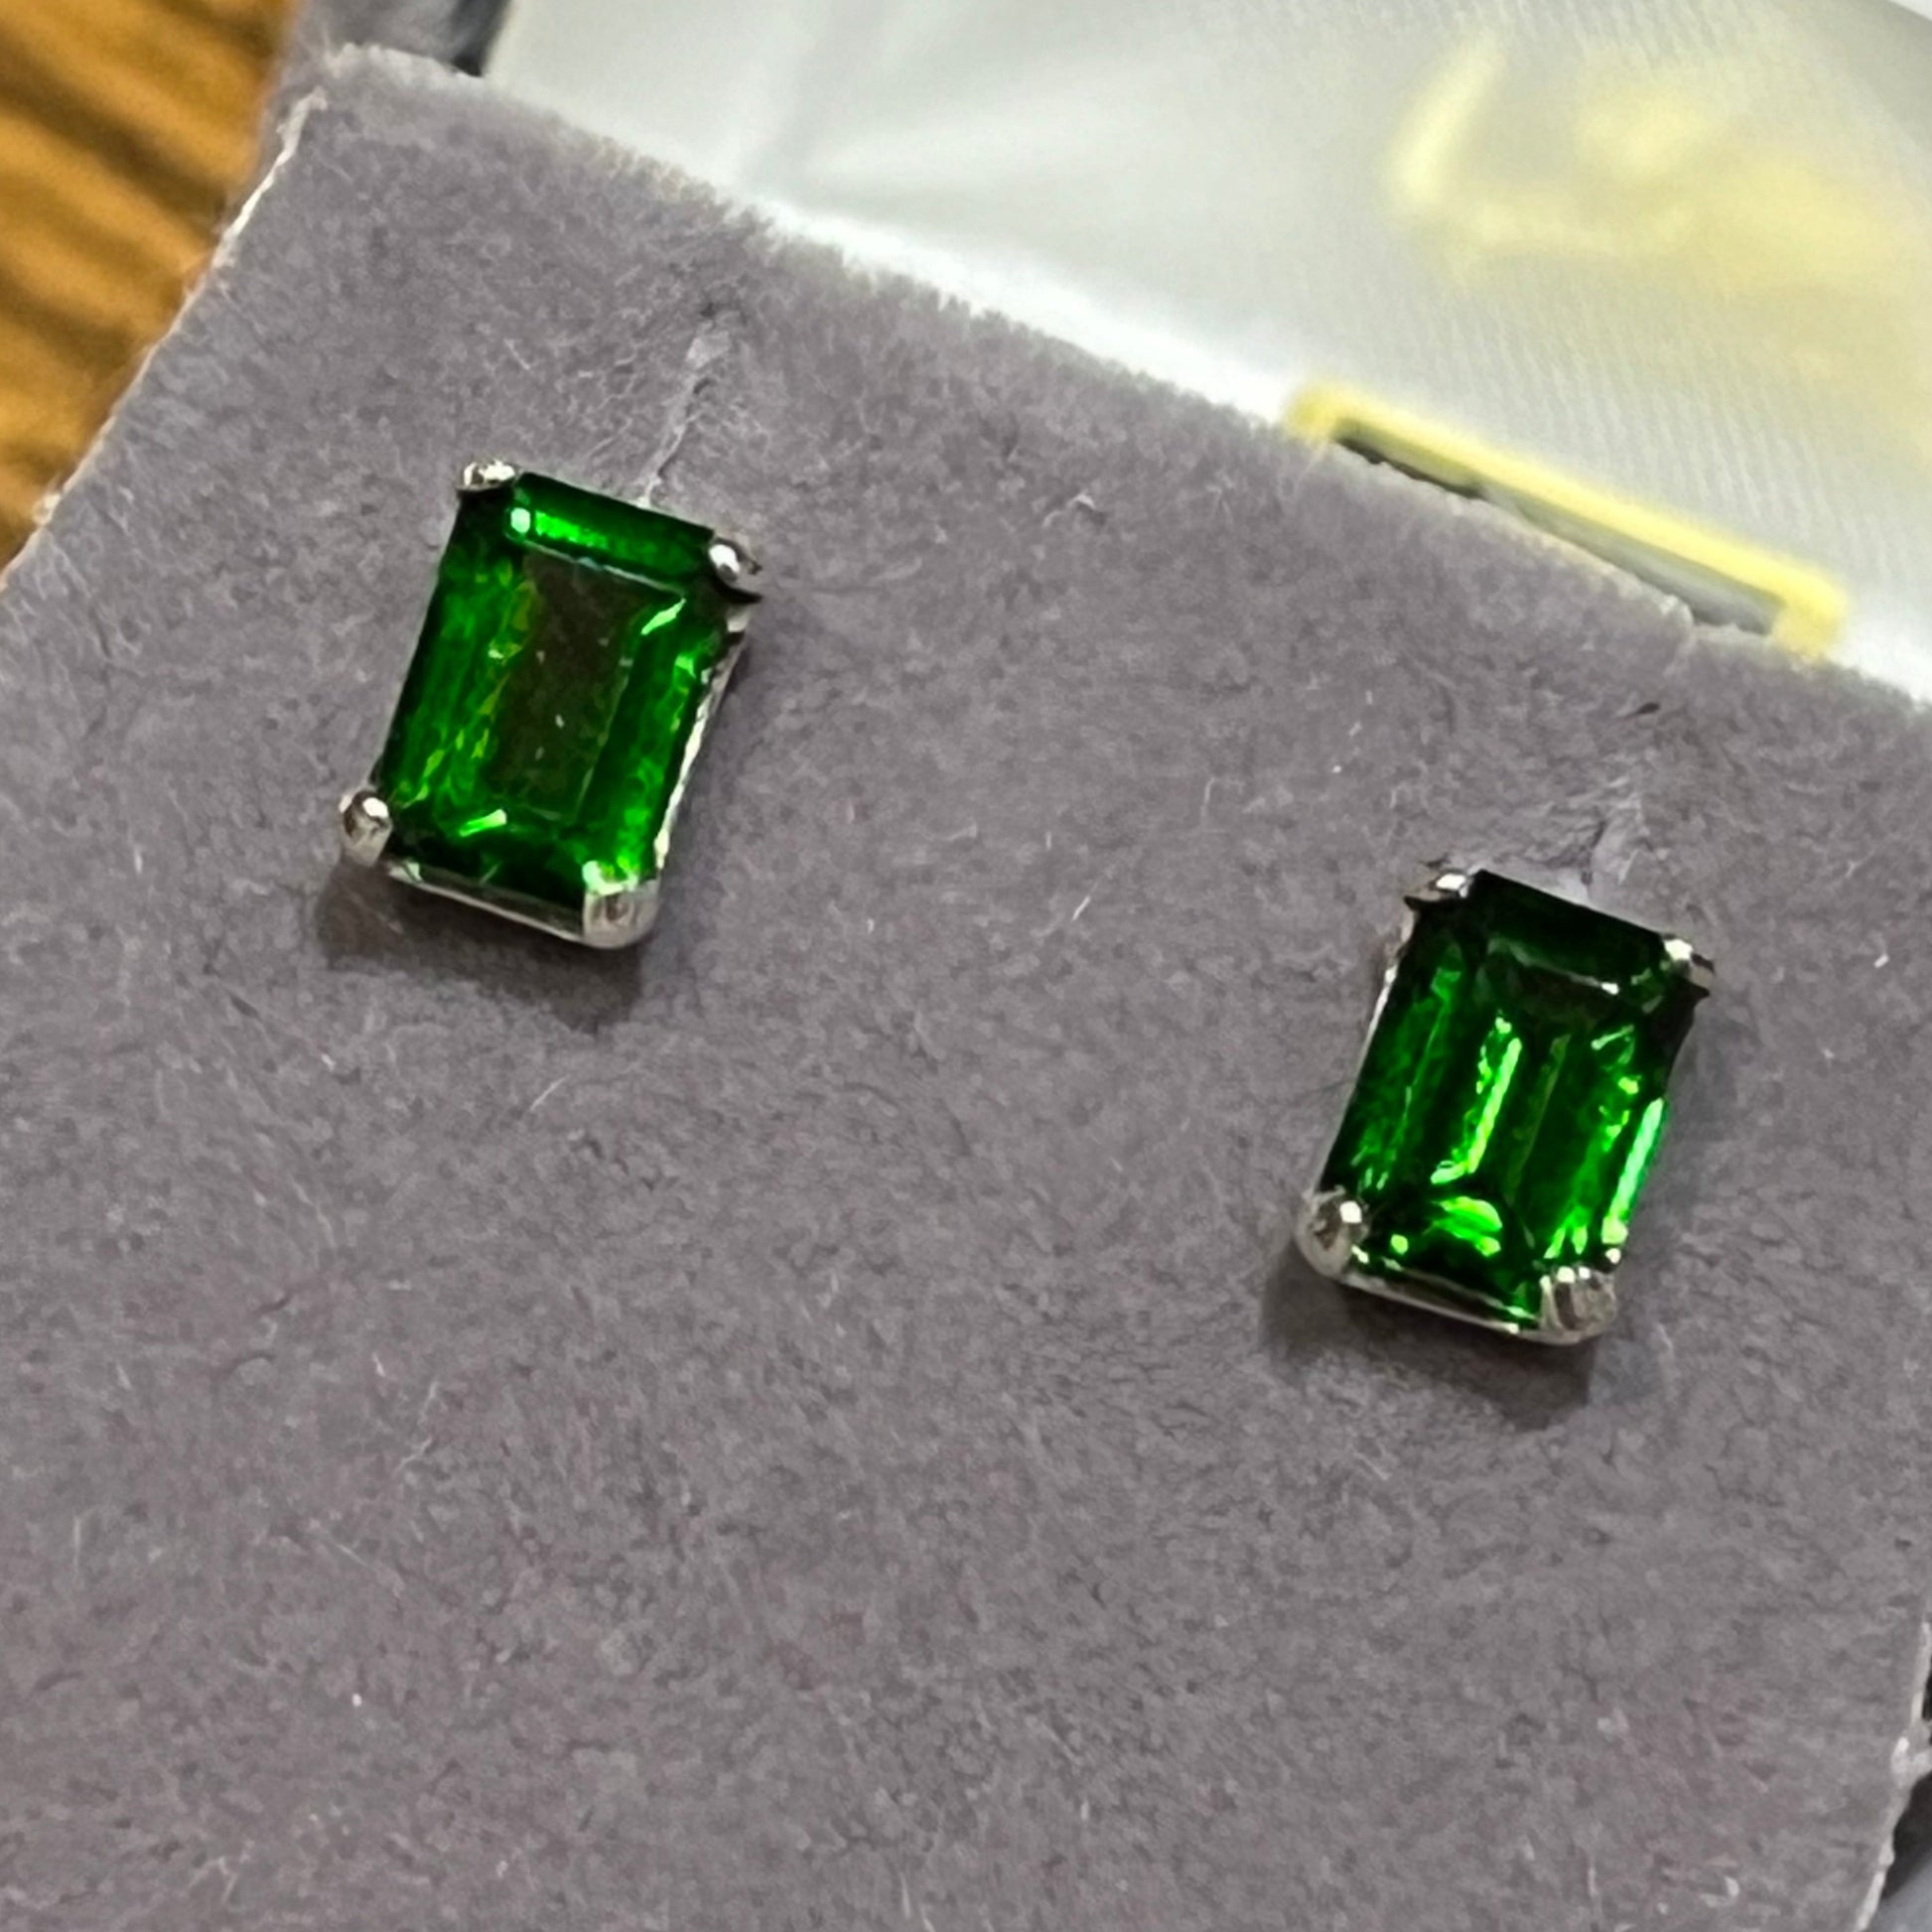 Chrome Diopside Earrings in silver 7x5 Emerald Cut 2.05 total ctw. 